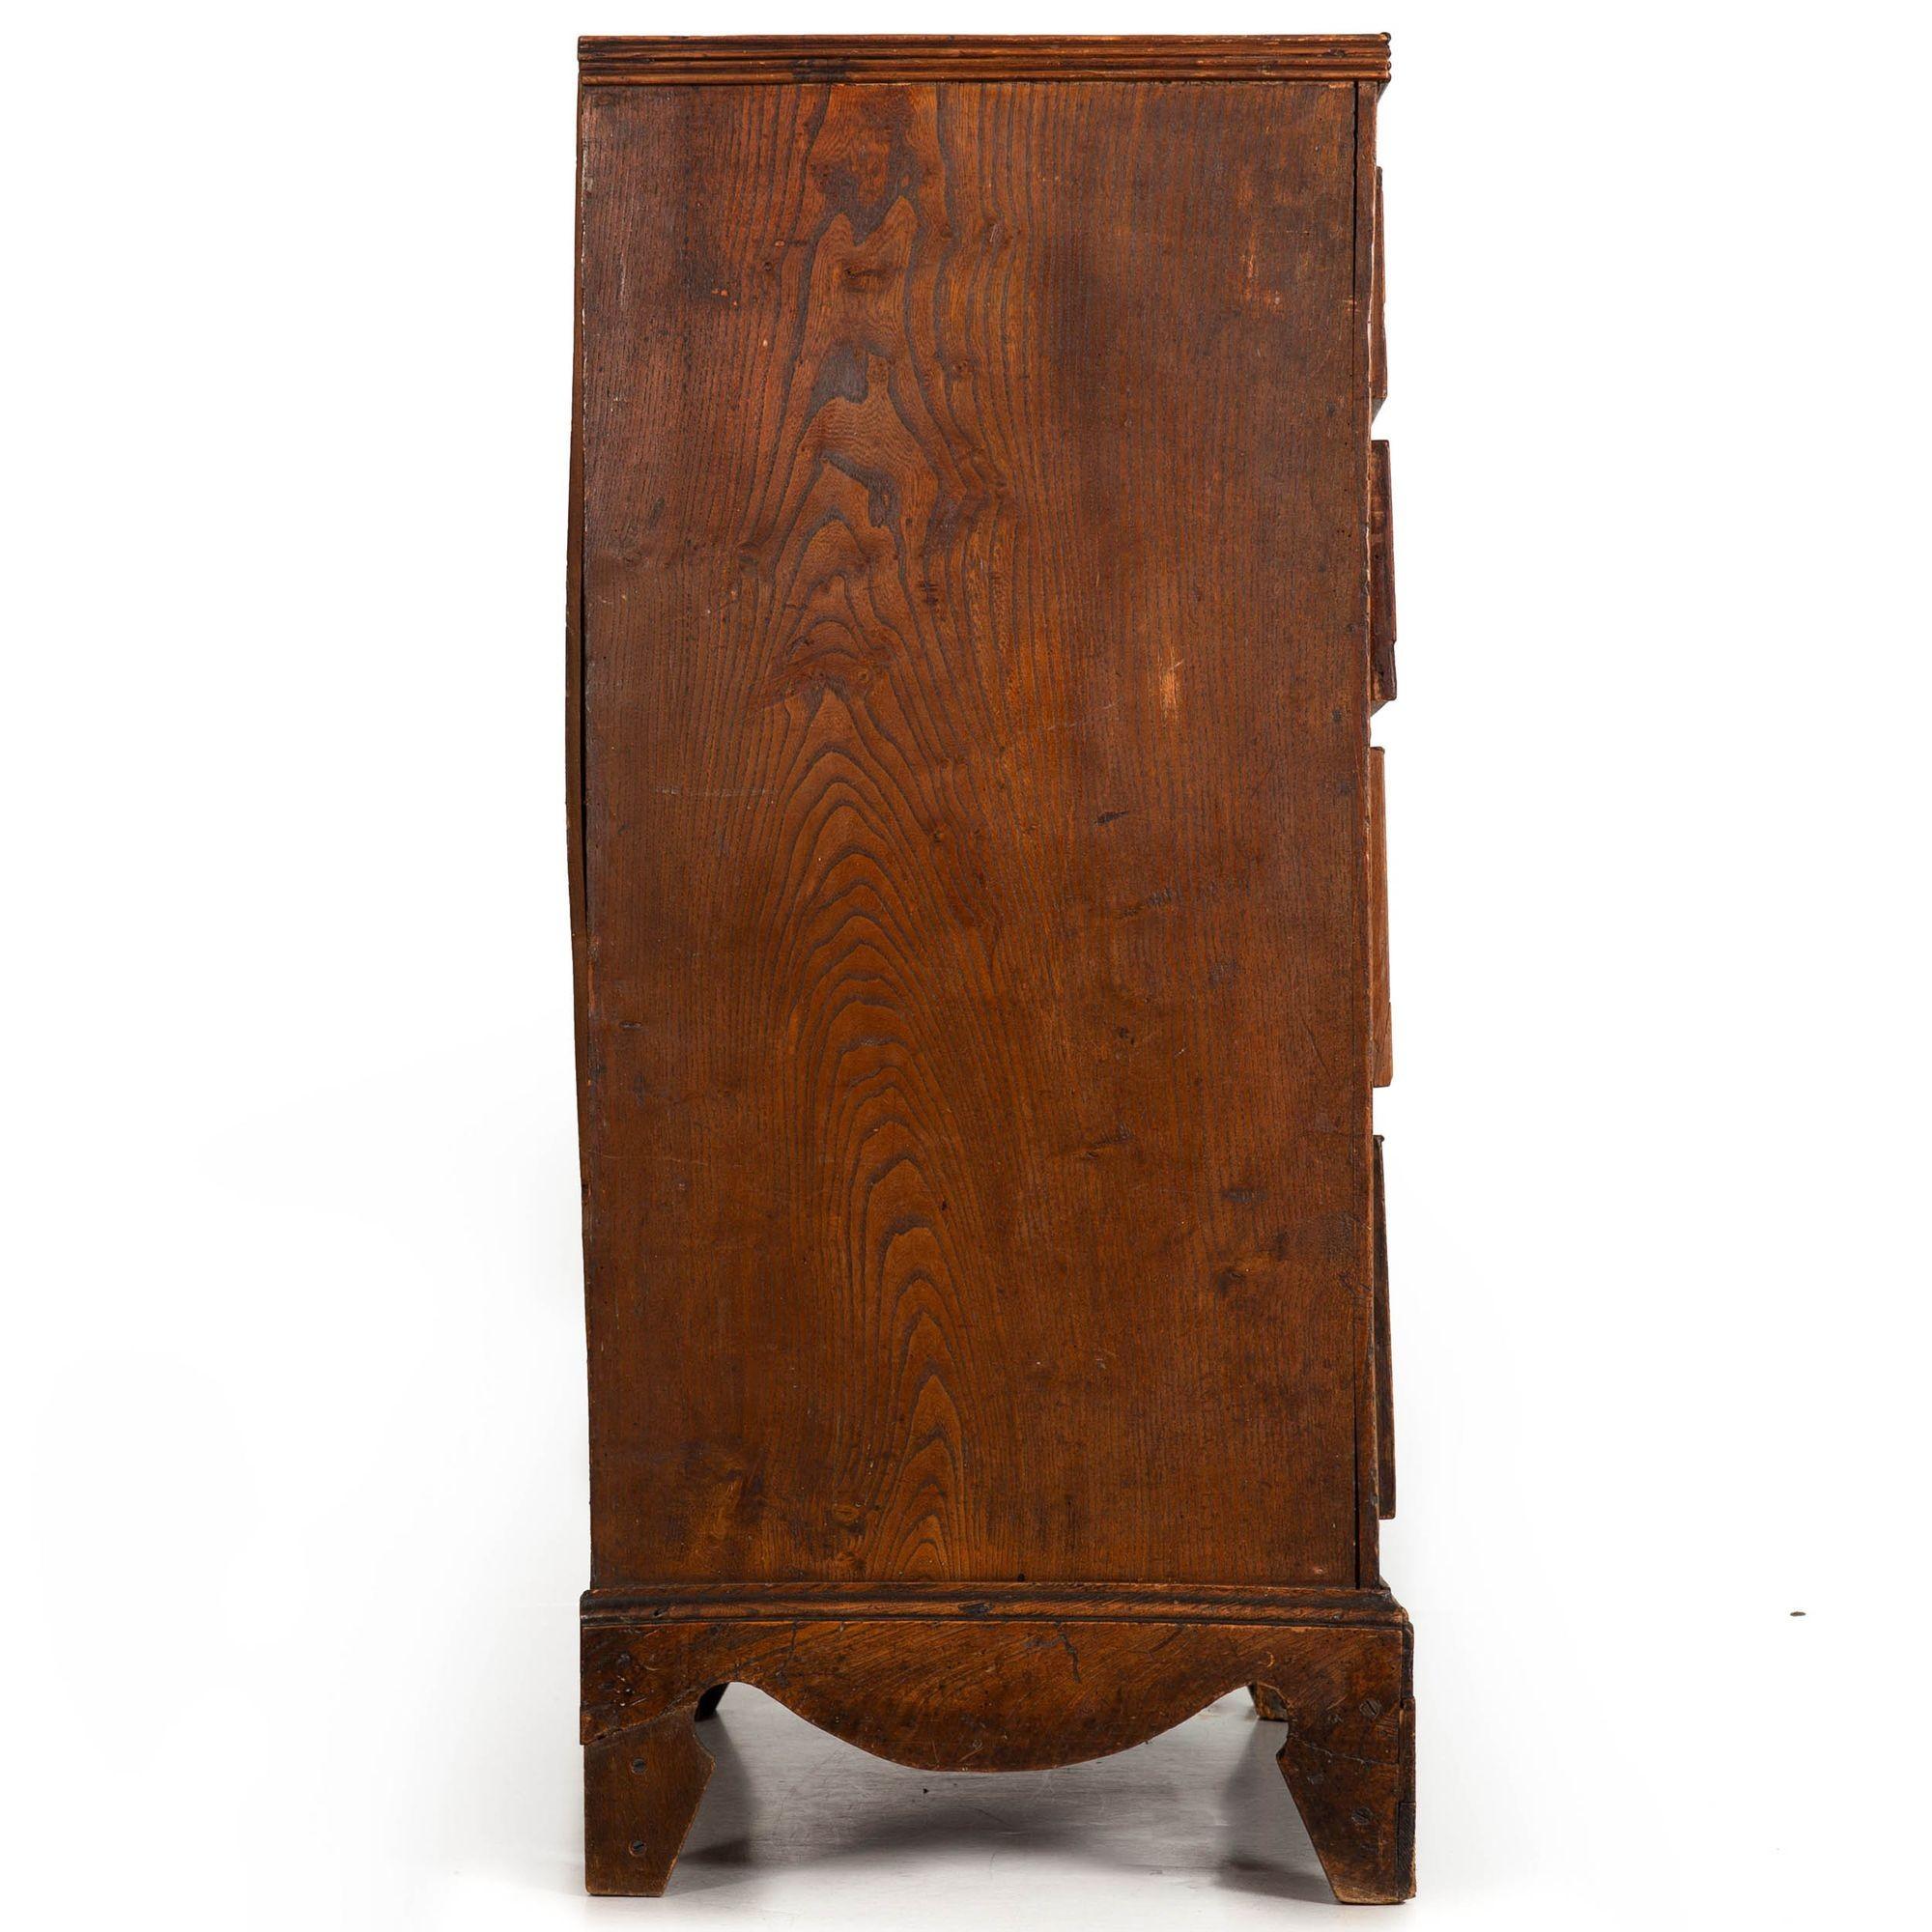 Regency English Antique Patinated Worn Elm Chest of Drawers, Early 19th Century For Sale